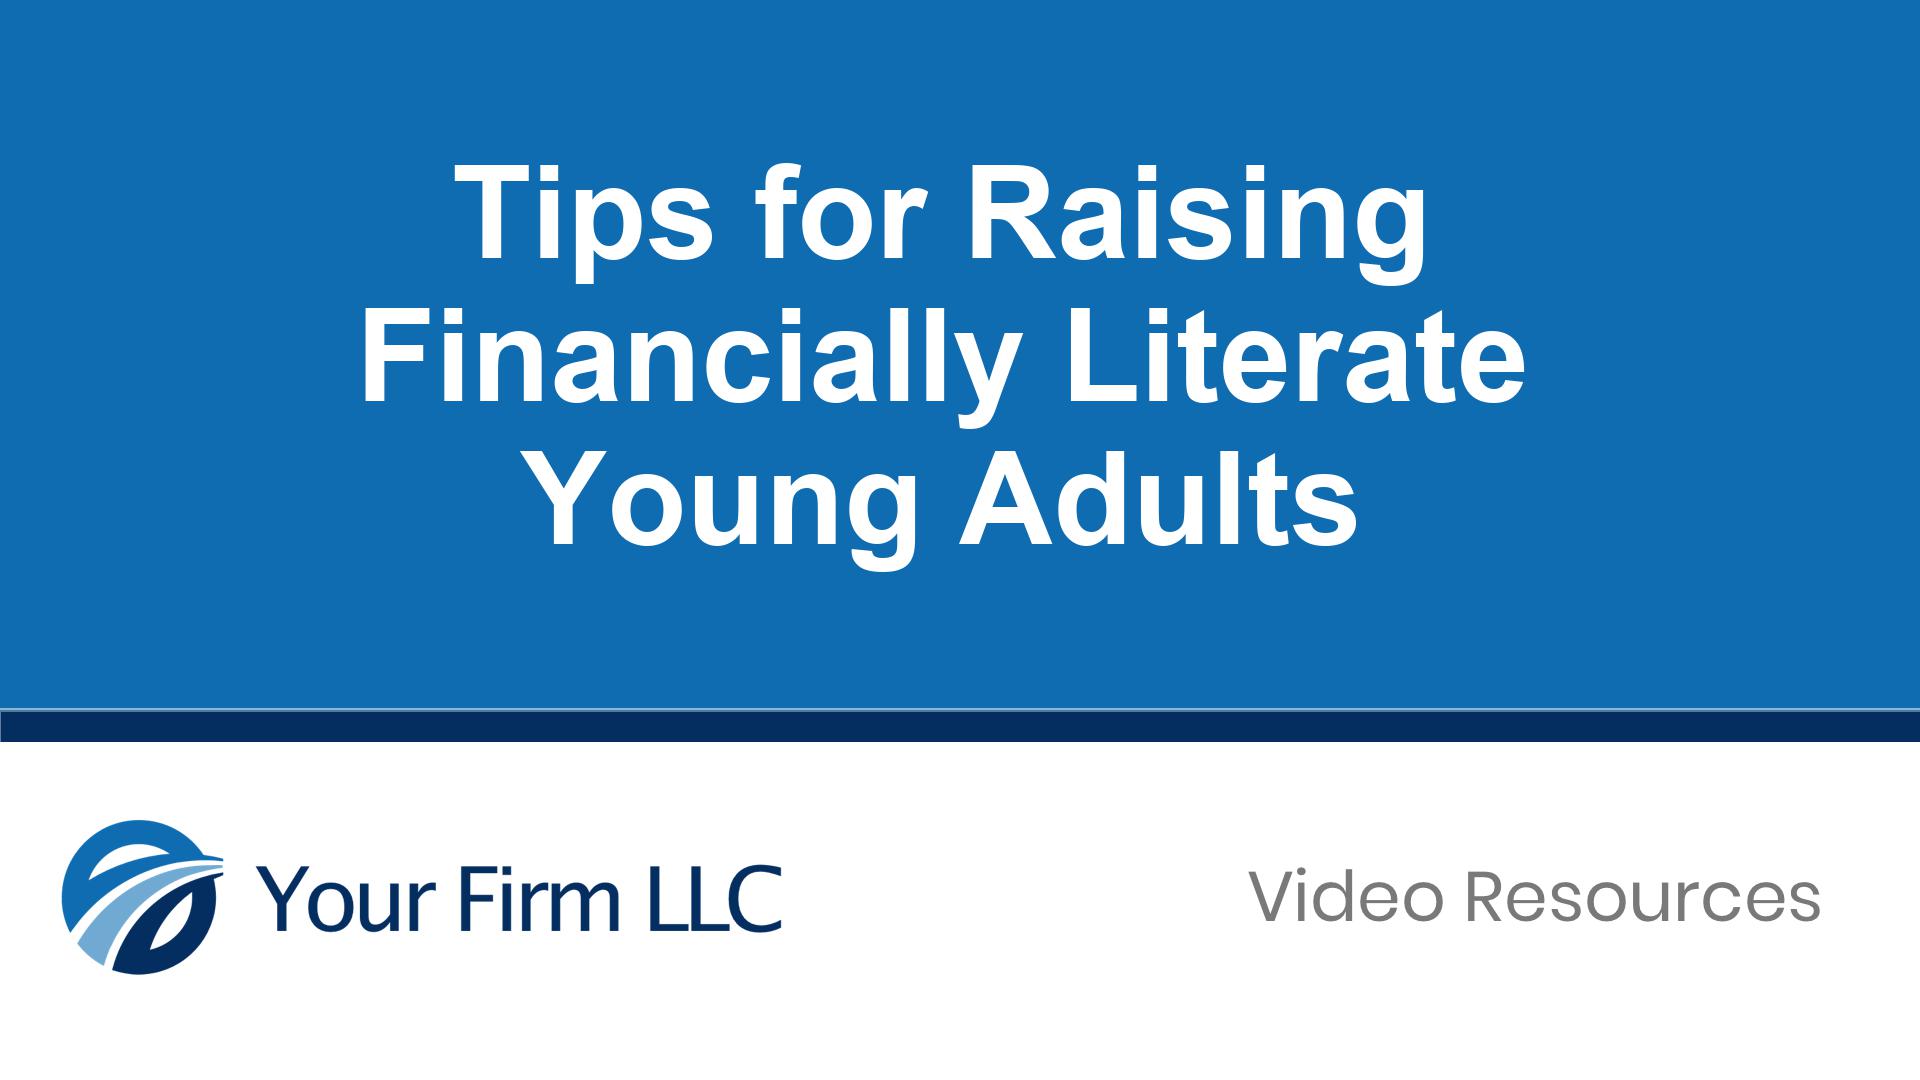 Tips for Raising Financially Literate Young Adults